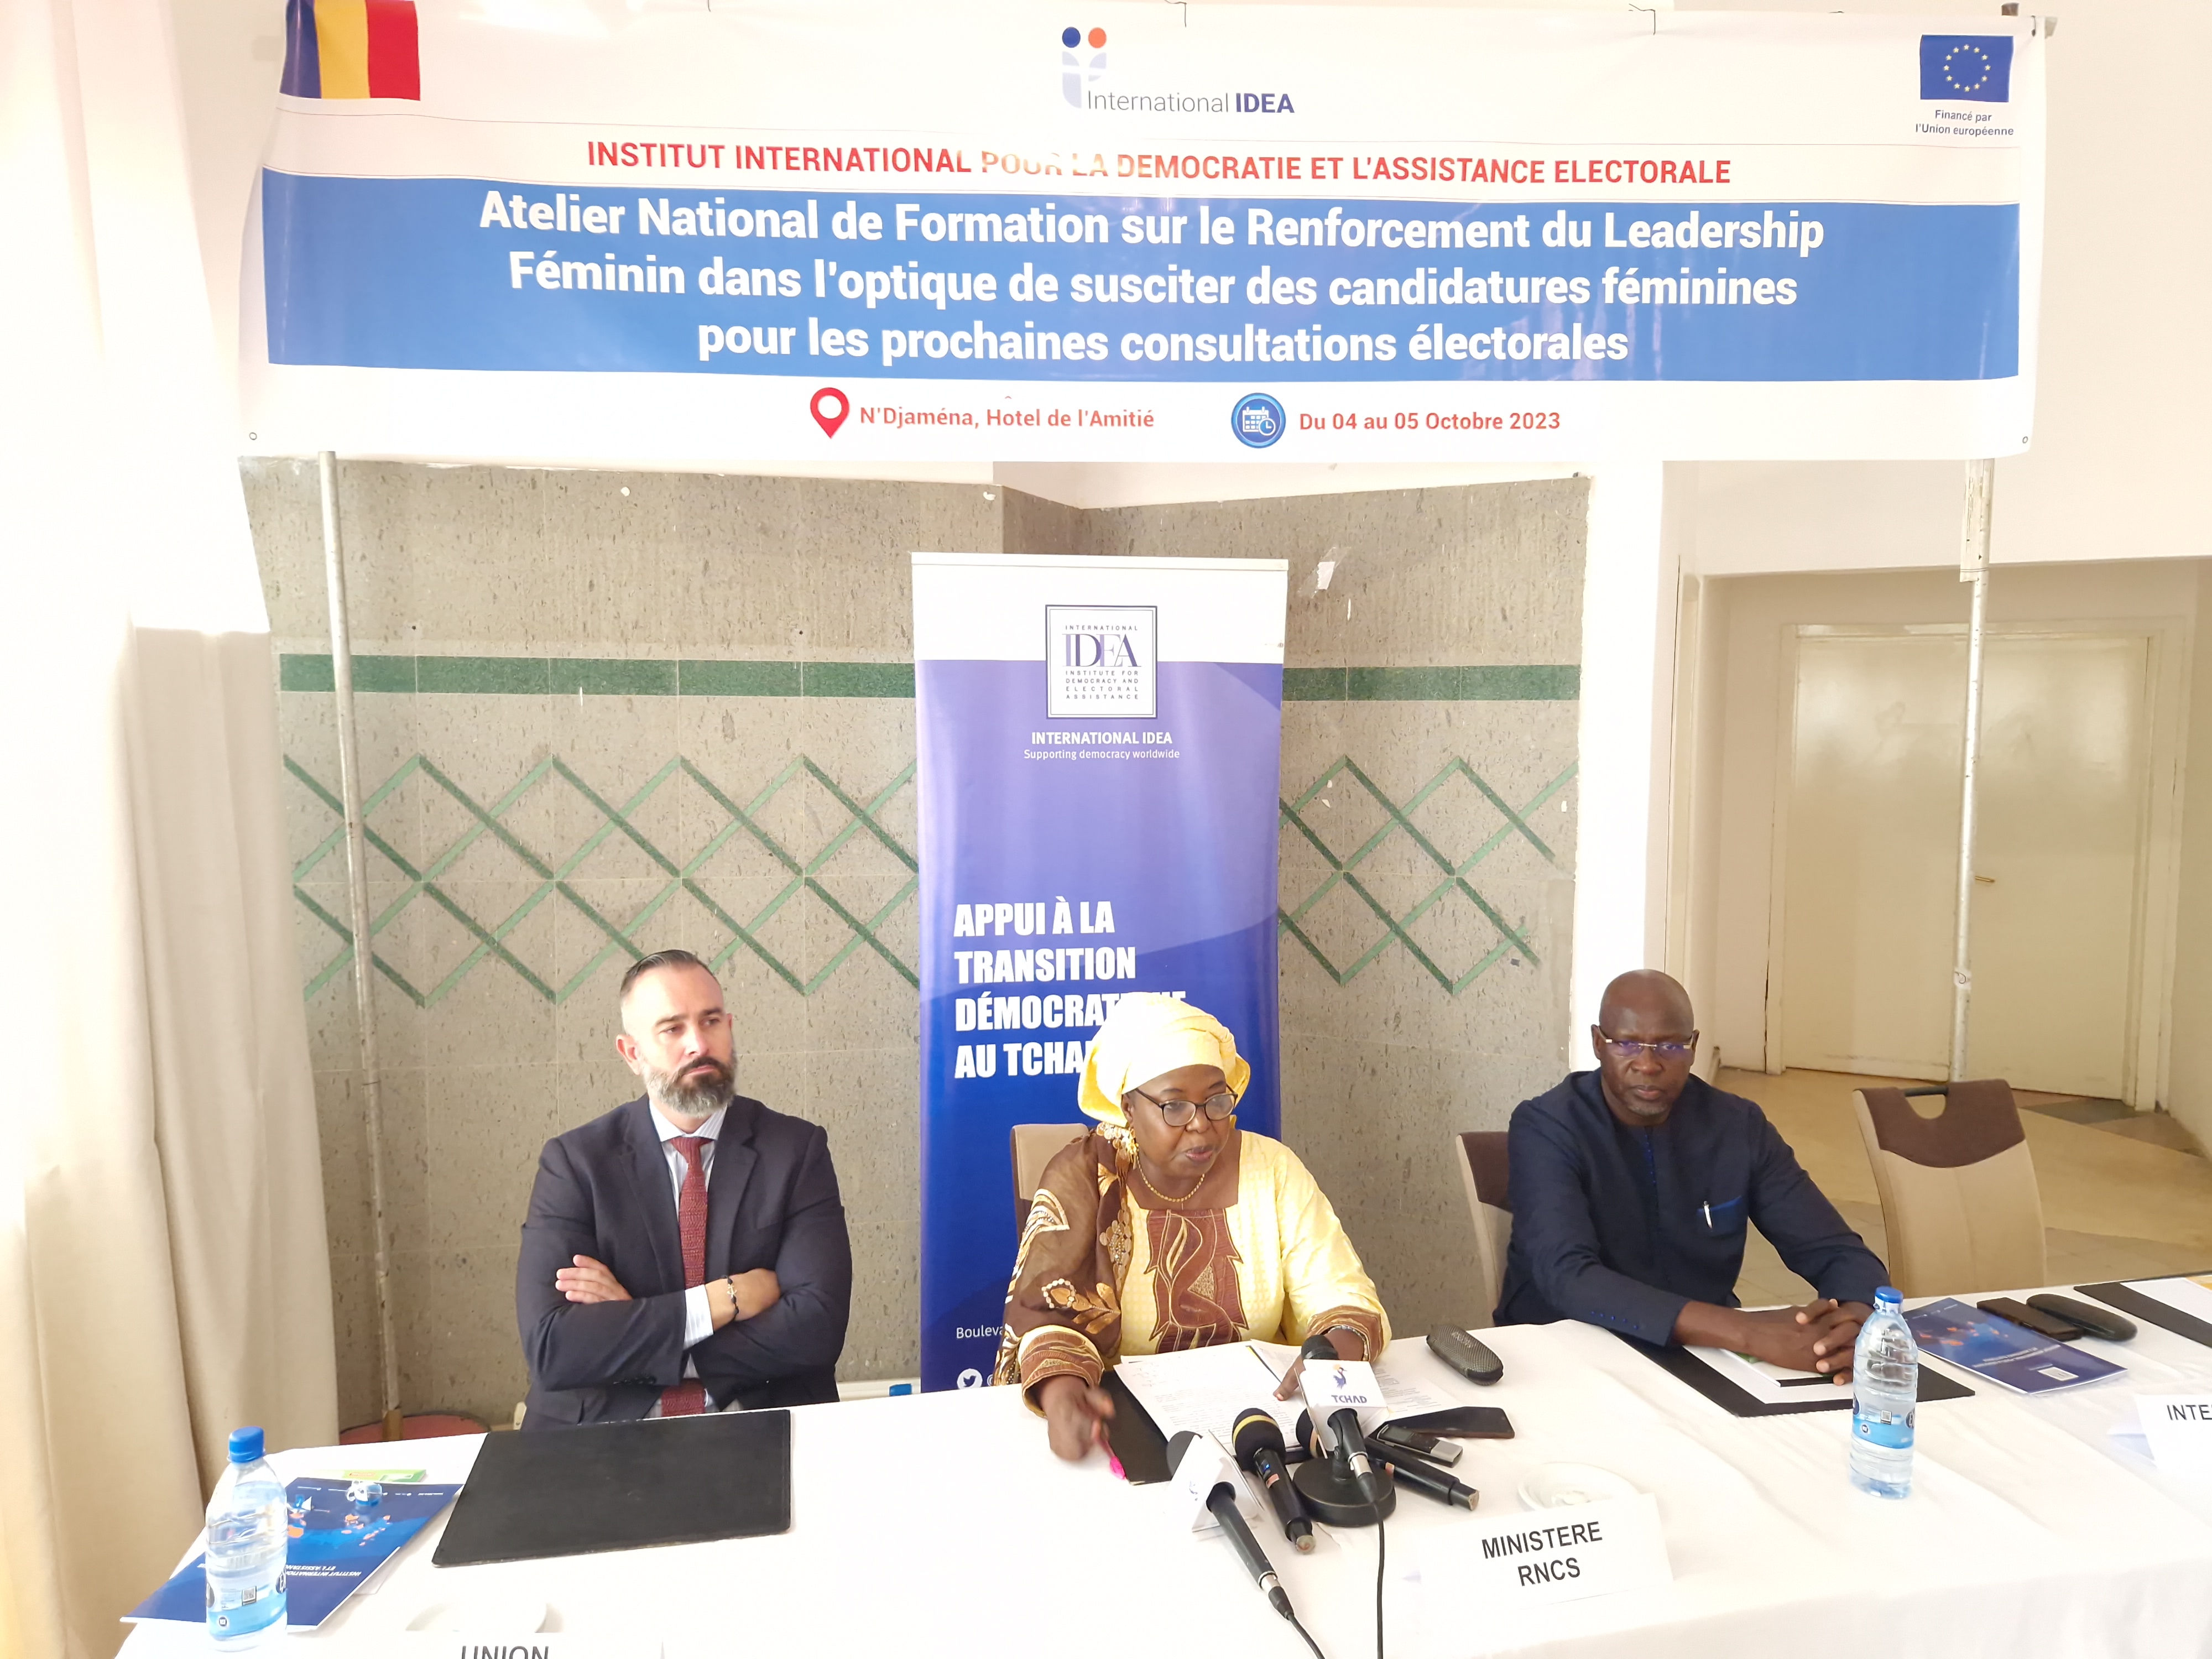 The Secretary General of the Ministry of National Reconciliation and Social Cohesion surrounded by the International IDEA Chad Programme Manager and the Sr Governance and Politics Advisor from the European Union Delegation in Chad.